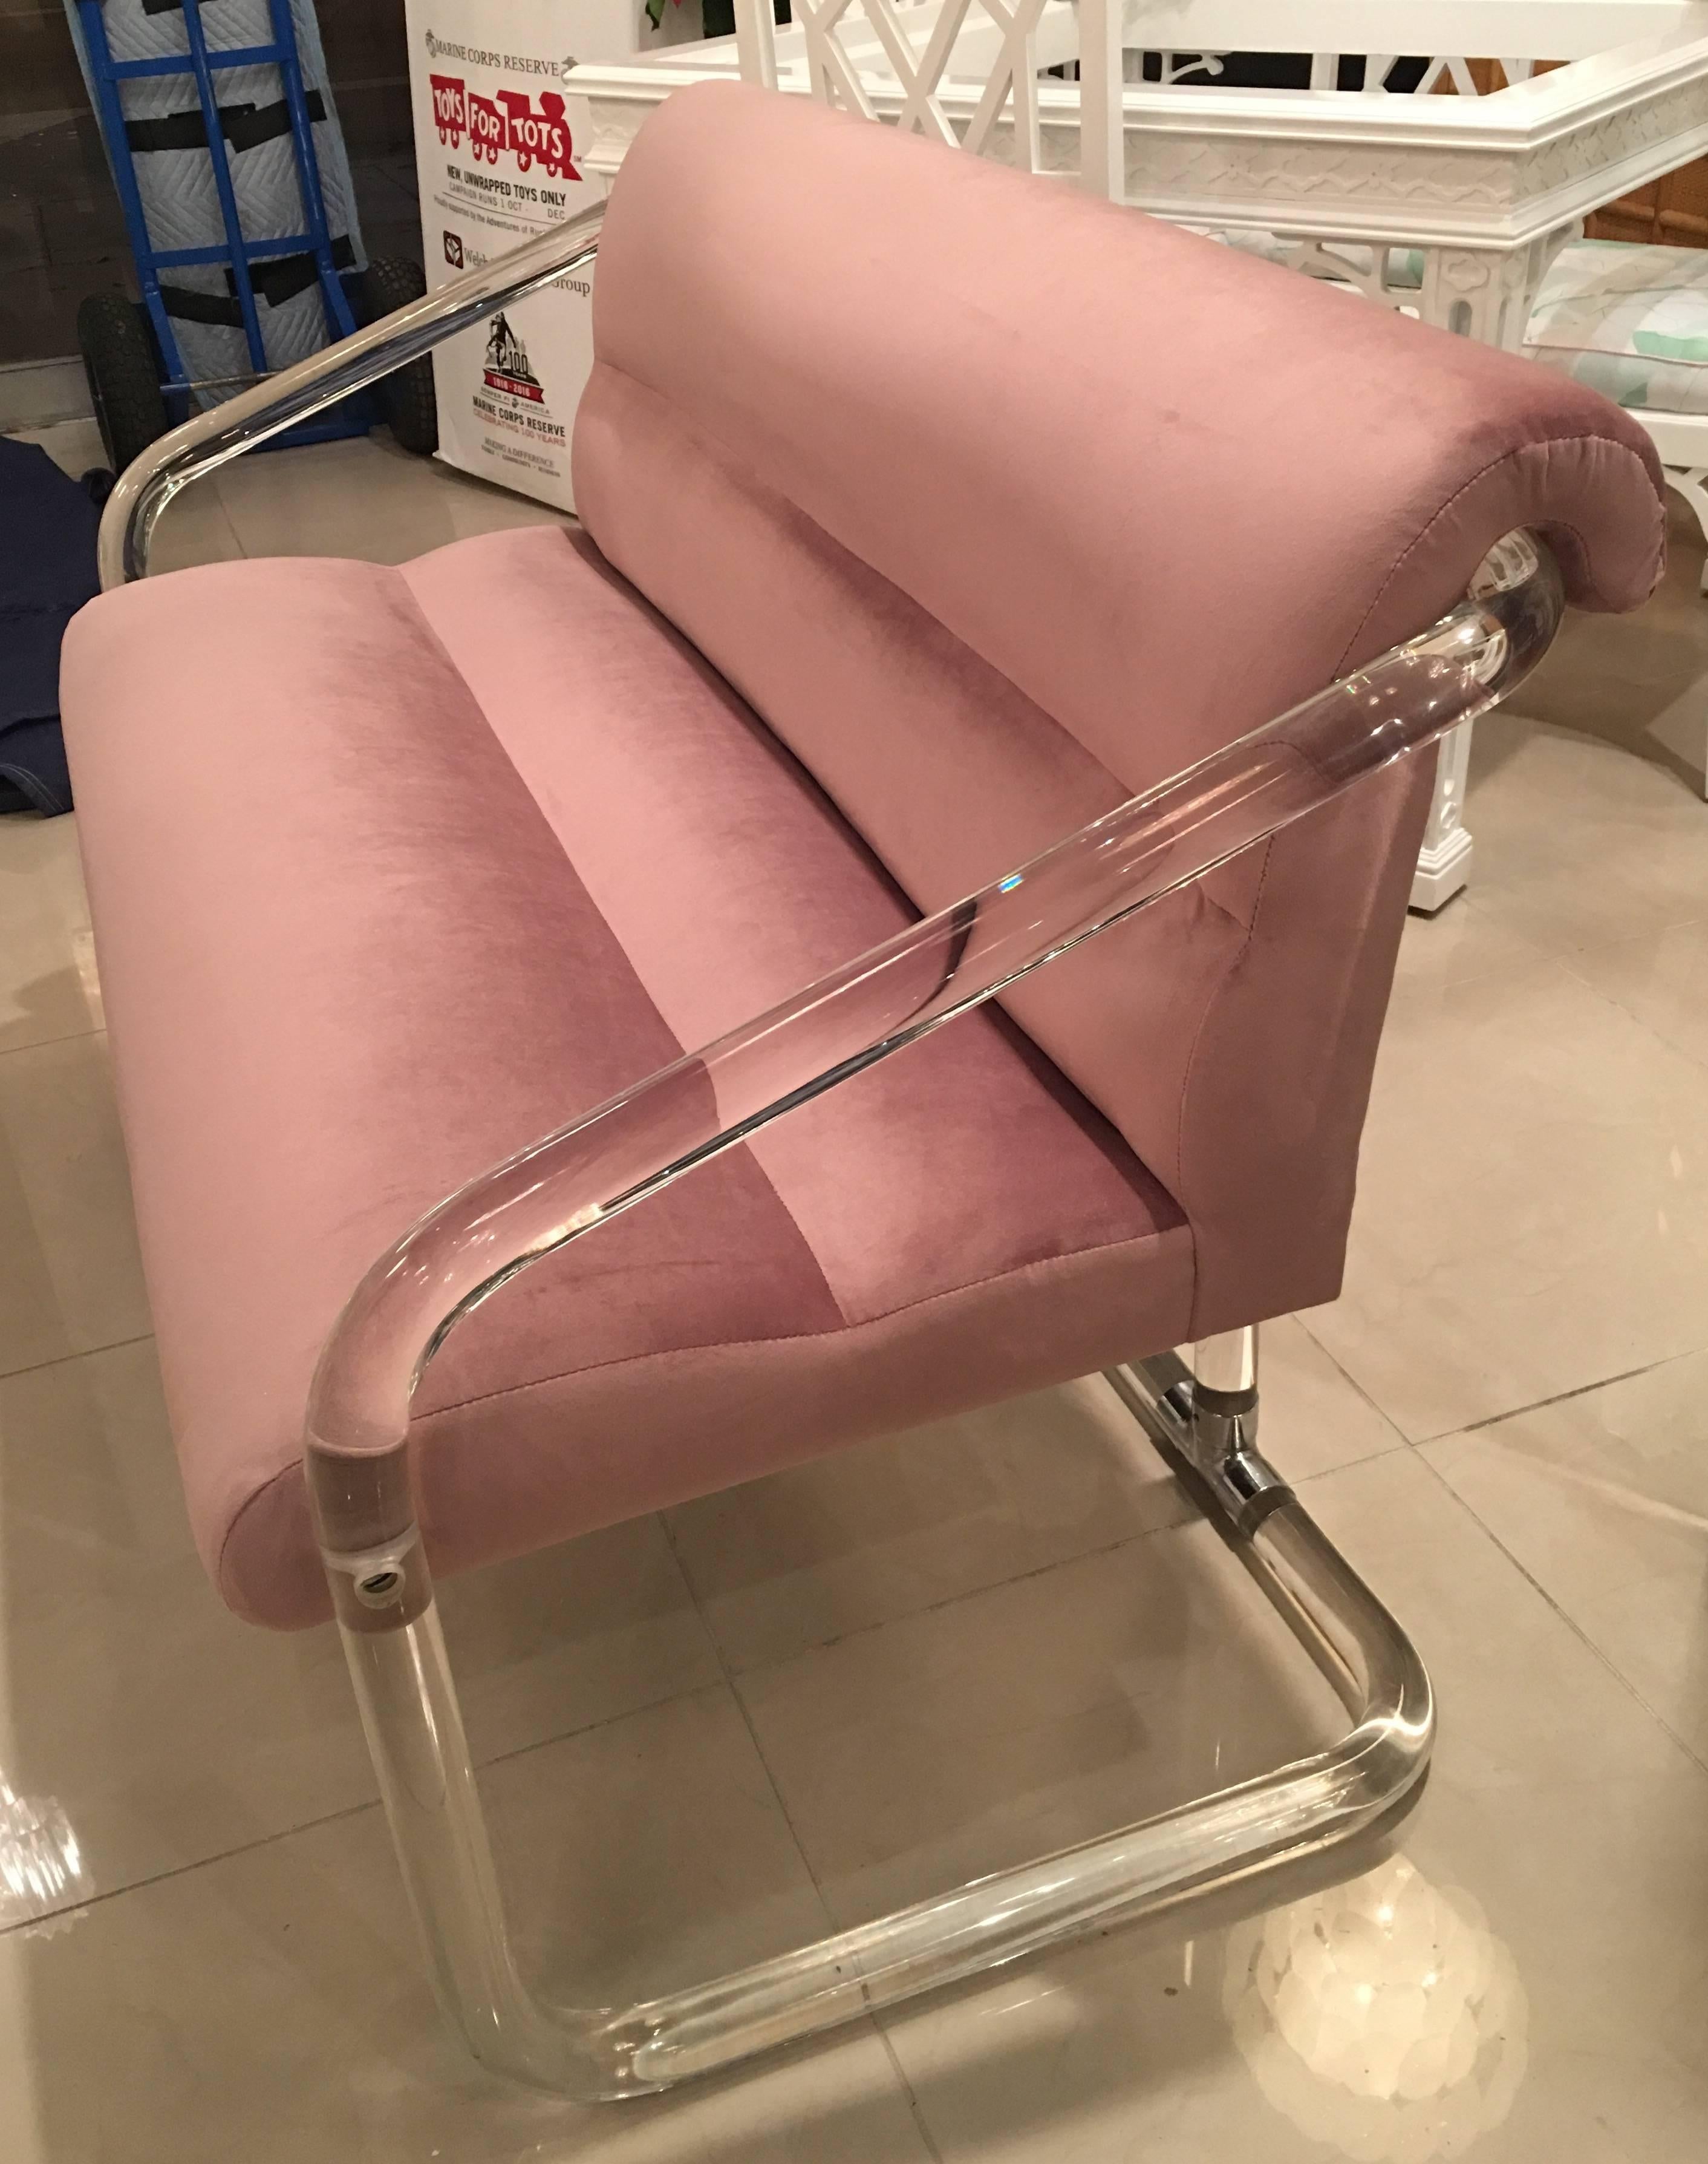 Vintage Hollywood Palm Beach Regency, Lucite and chrome Lion in Frost, signed and dated, 1979, loveseat bench, settee. New upholstery in a beautiful lavender velvet. Waterfall arm style. This is extremely rare! I have never seen this piece before.